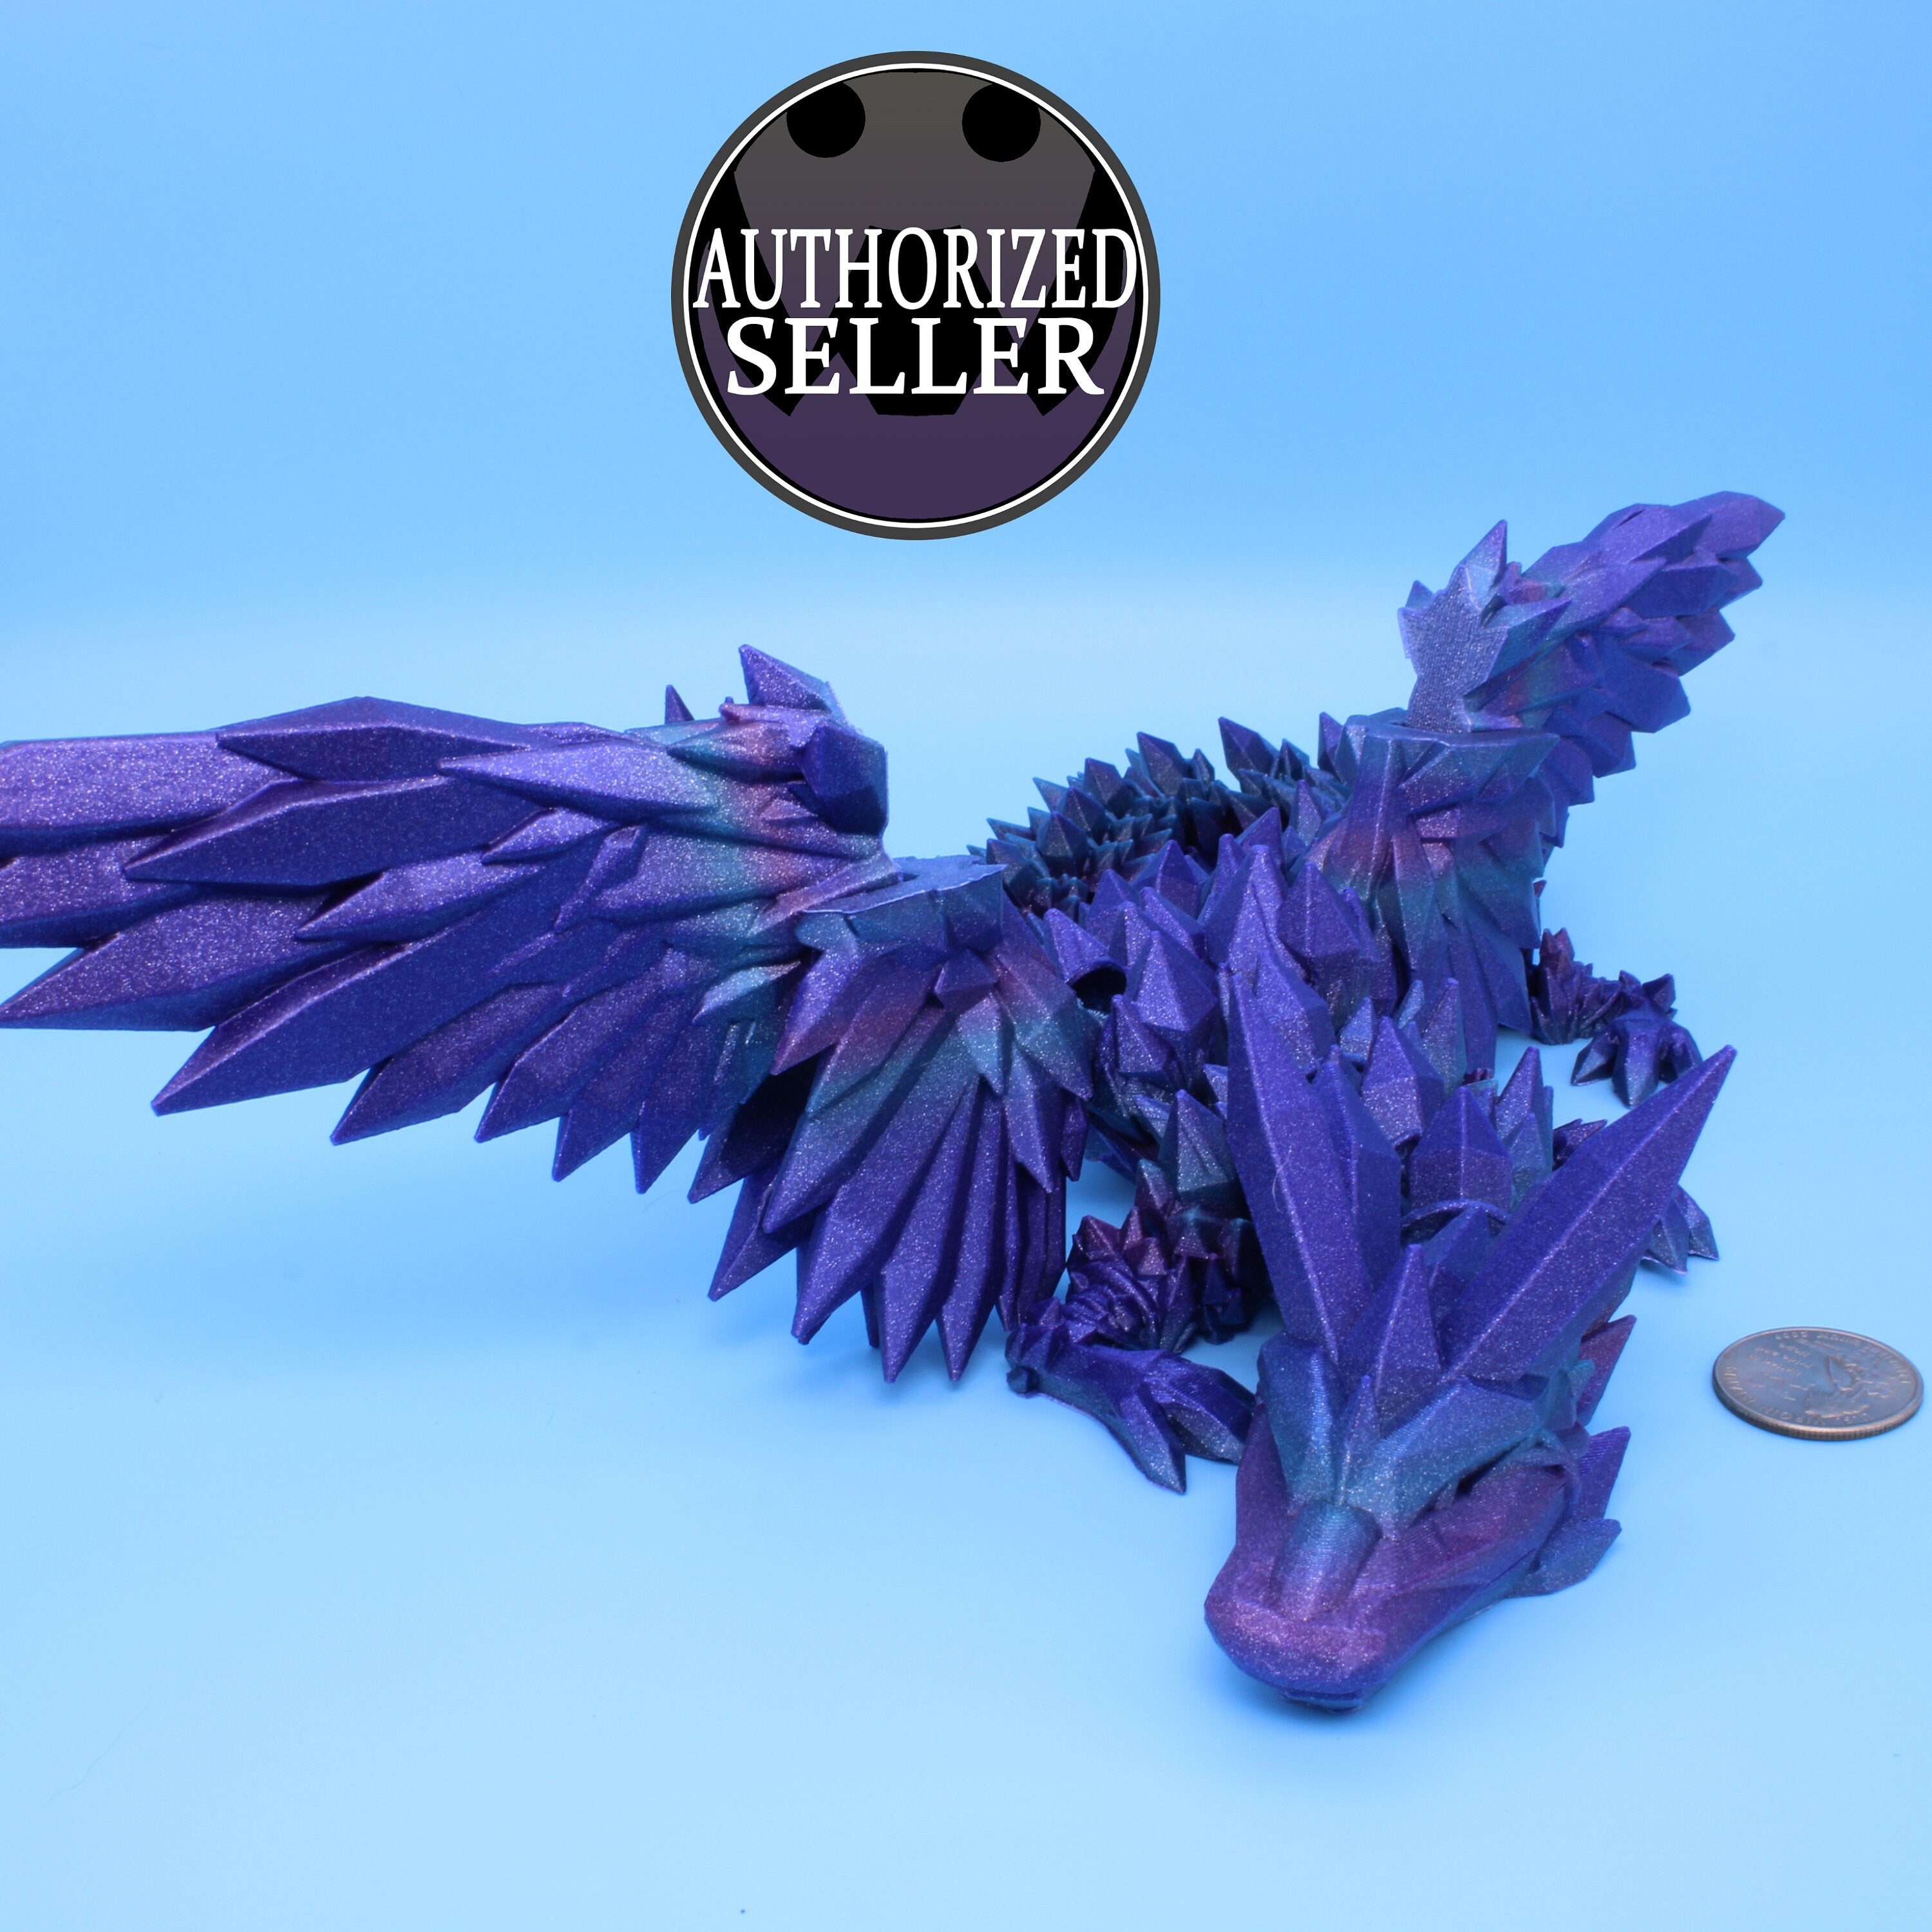 3D Printed Dragon - Customizable, Made to Order Articulated Fidget Mythical  Dragon Toy, Gift (M, Dual Color Shiny Pink/Blue)